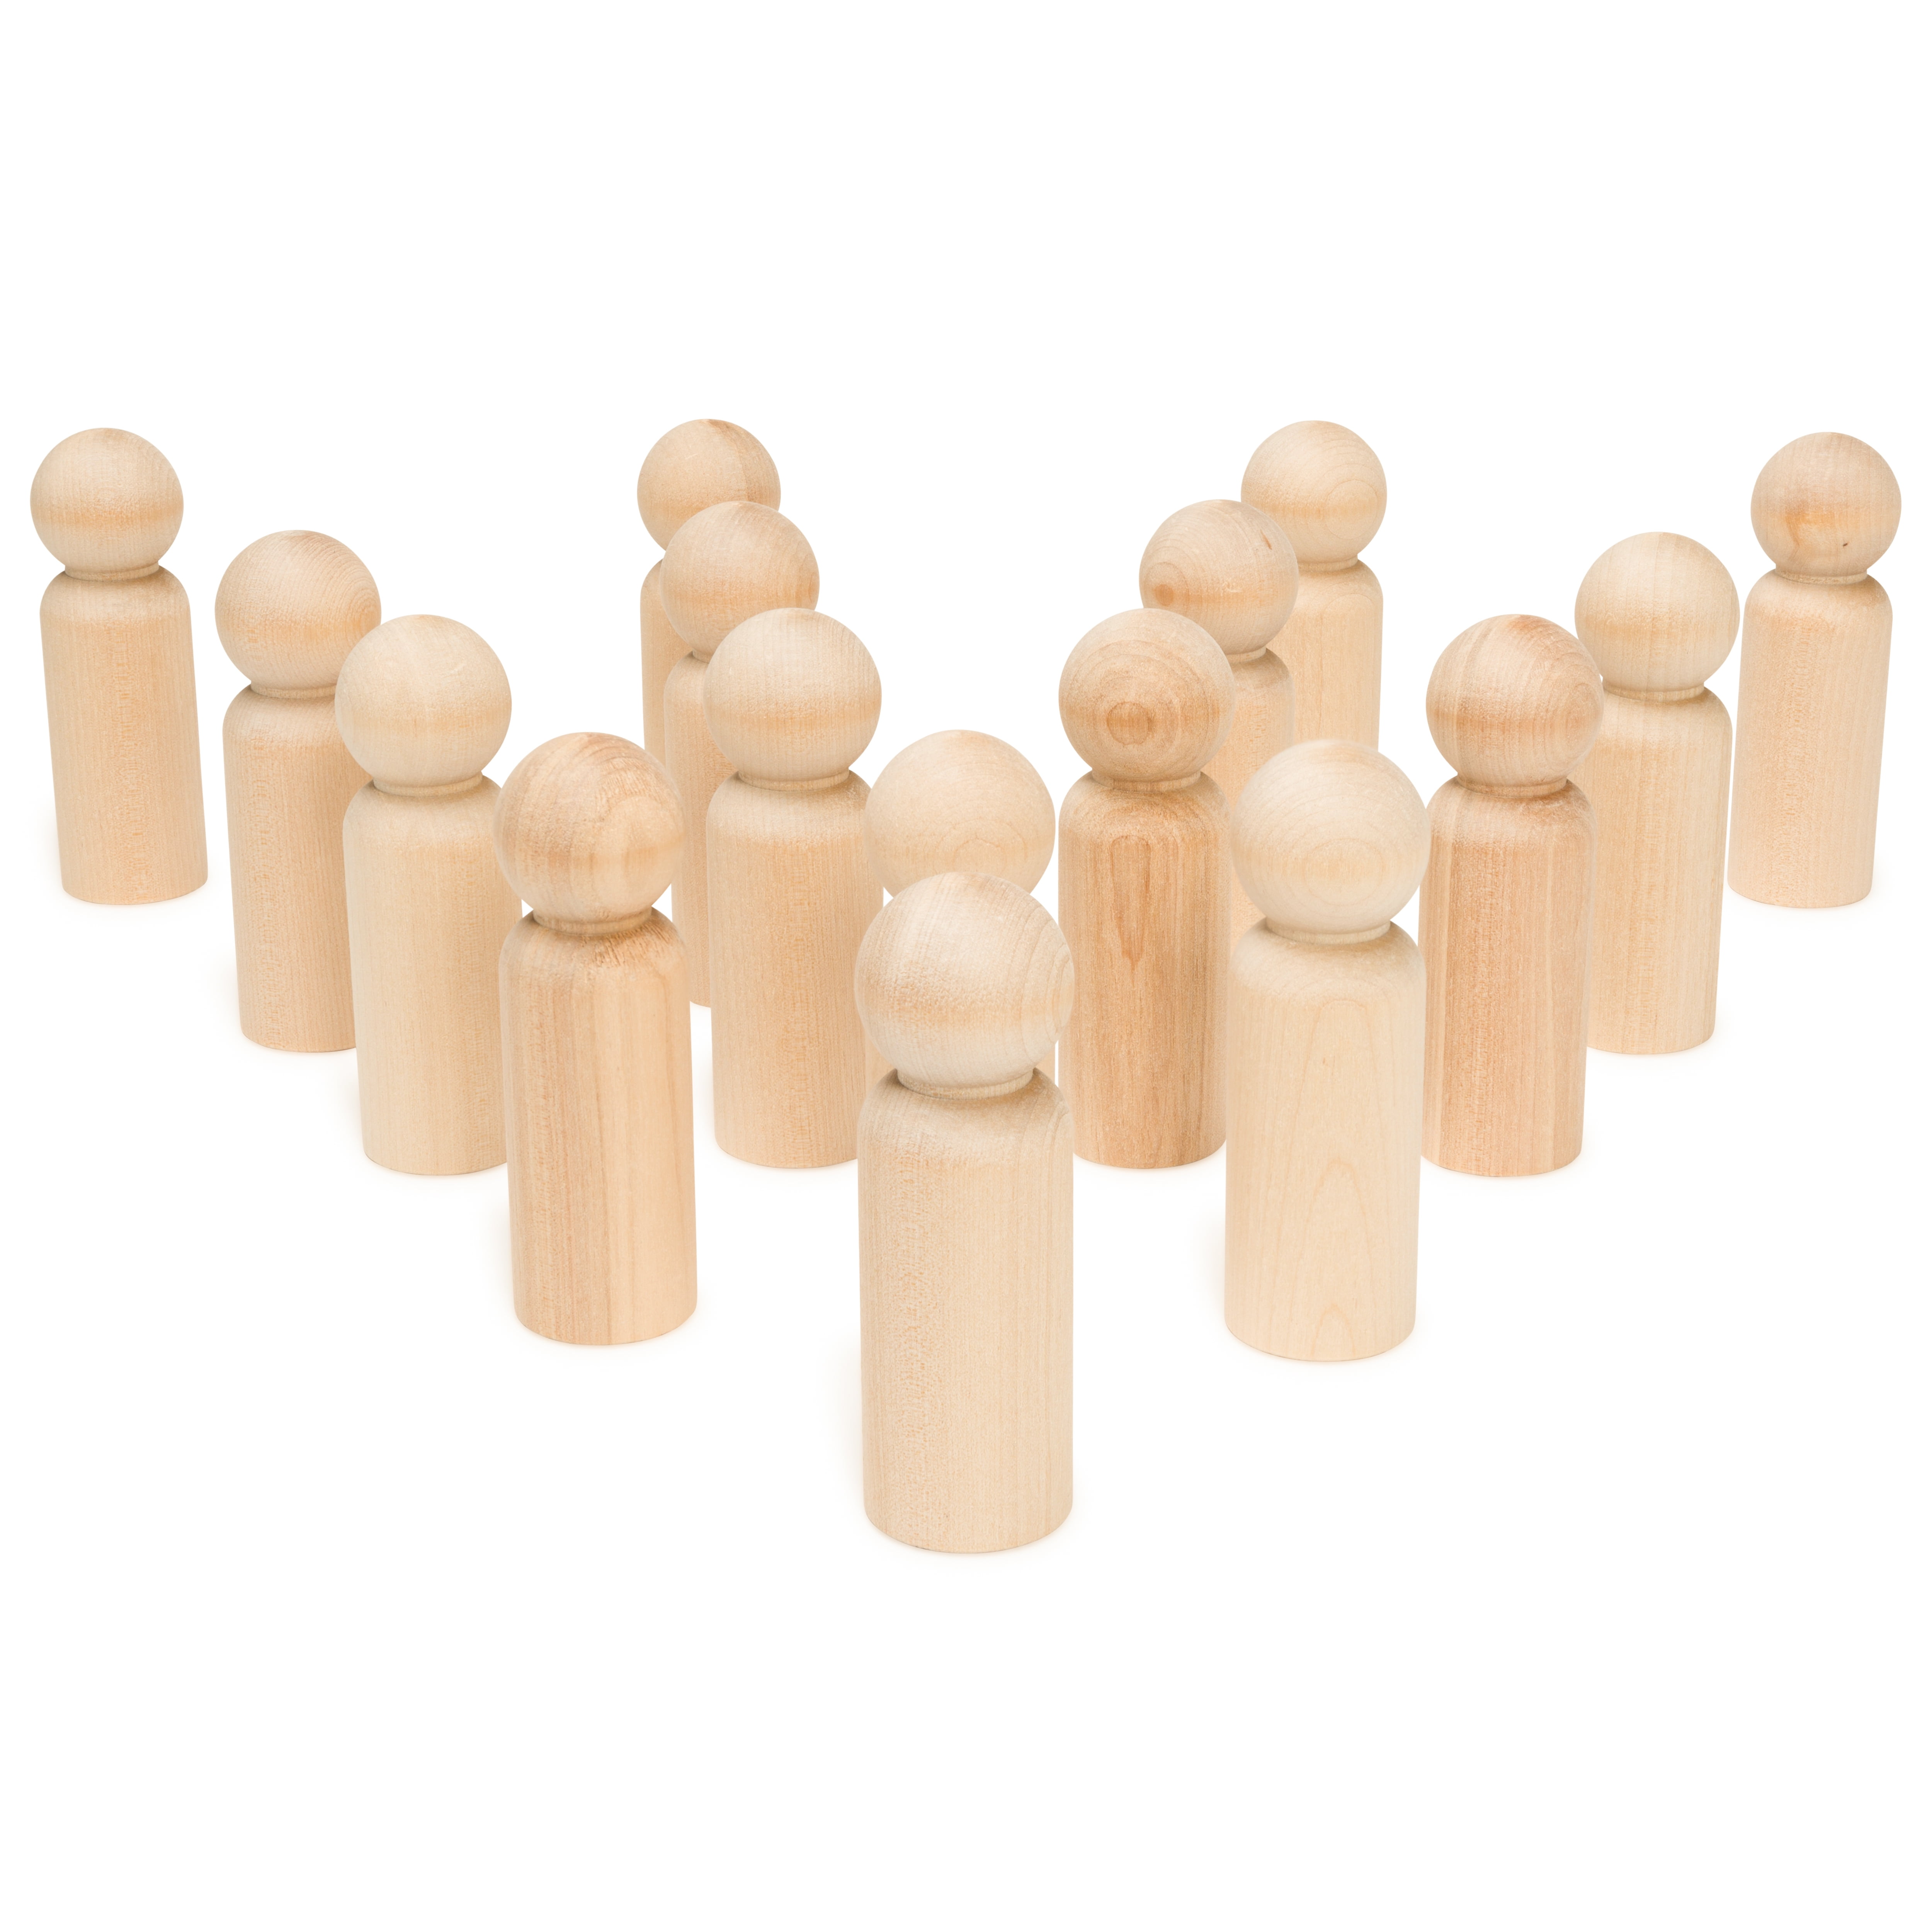 Large Wooden Peg Dolls Unfinished 3.5 inches, Dad Shape, Pack of 100 Birch  Peg People, Charming Wood Figurines to Paint